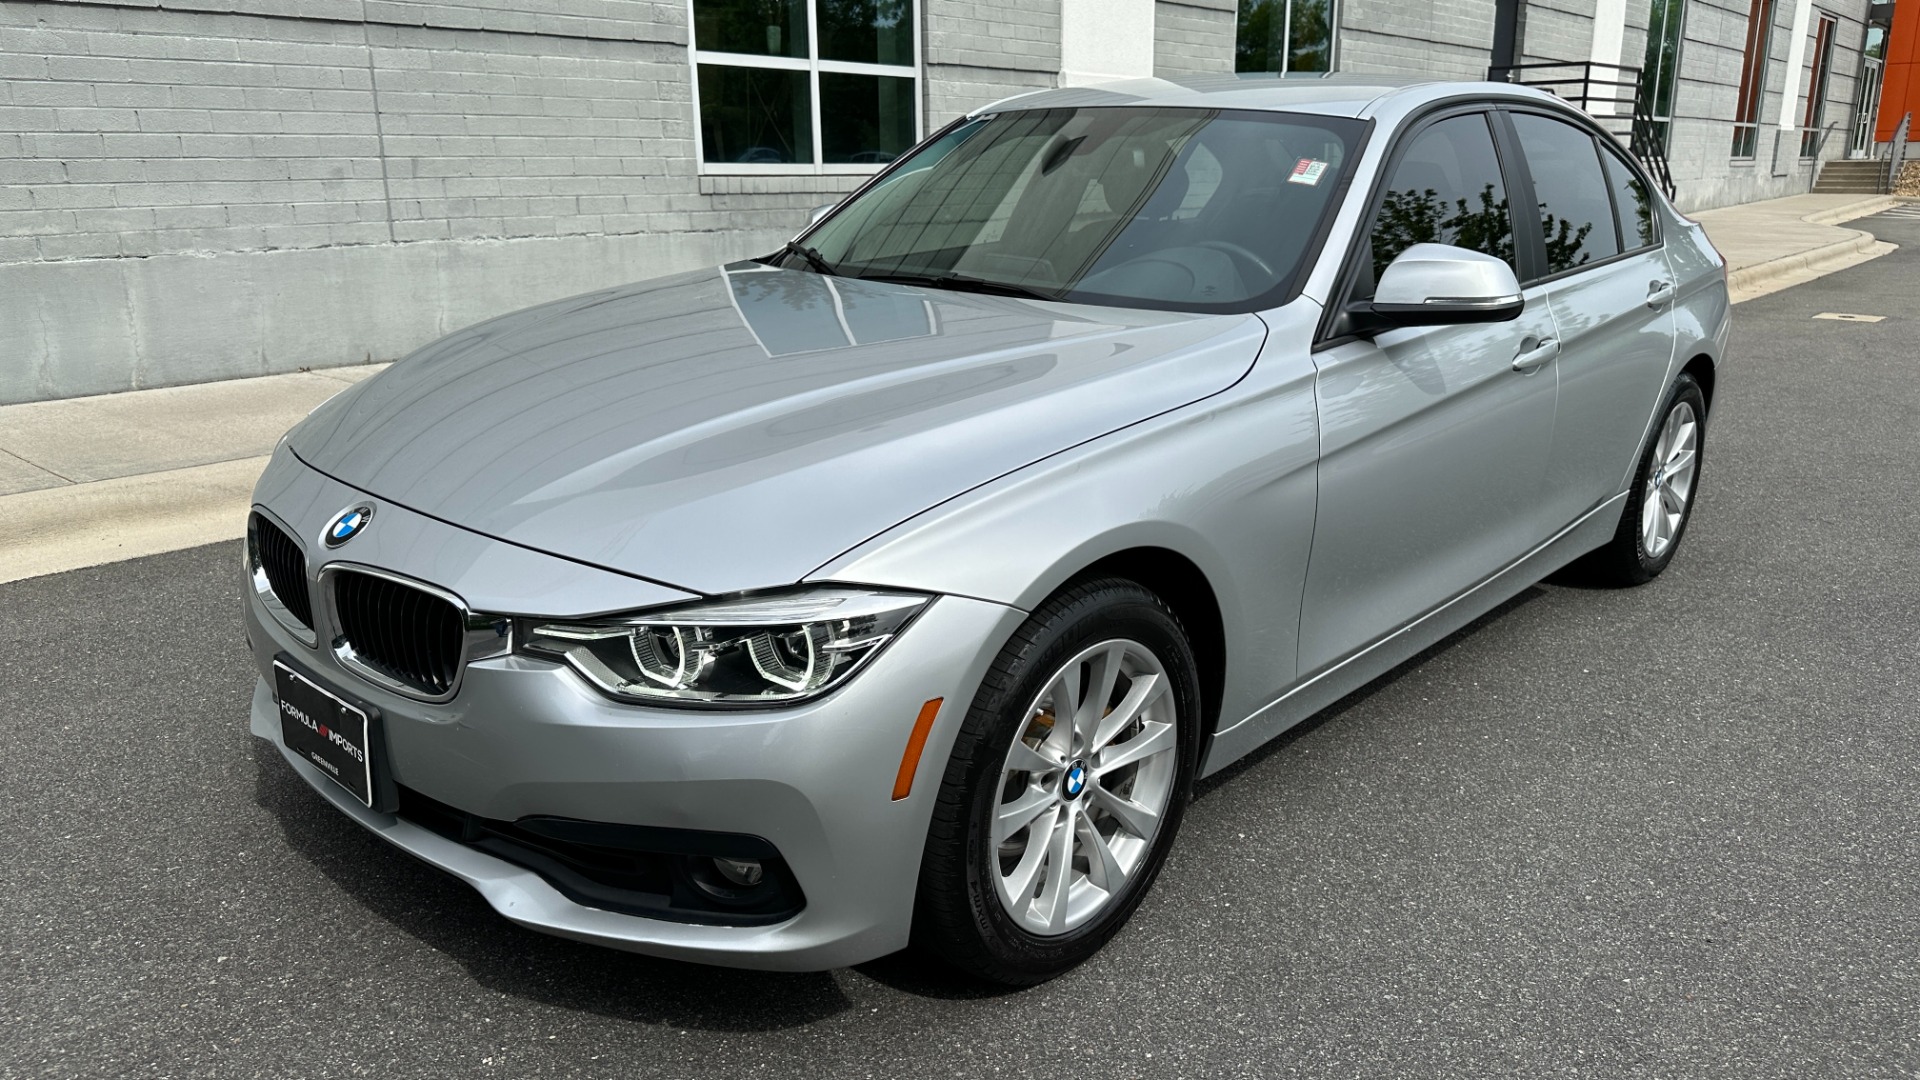 Used 2018 BMW 3 SERIES 320I XDRIVE SEDAN / HTD STS / ACTV BLIND SPT DET / REARVIEW for sale $27,995 at Formula Imports in Charlotte NC 28227 2